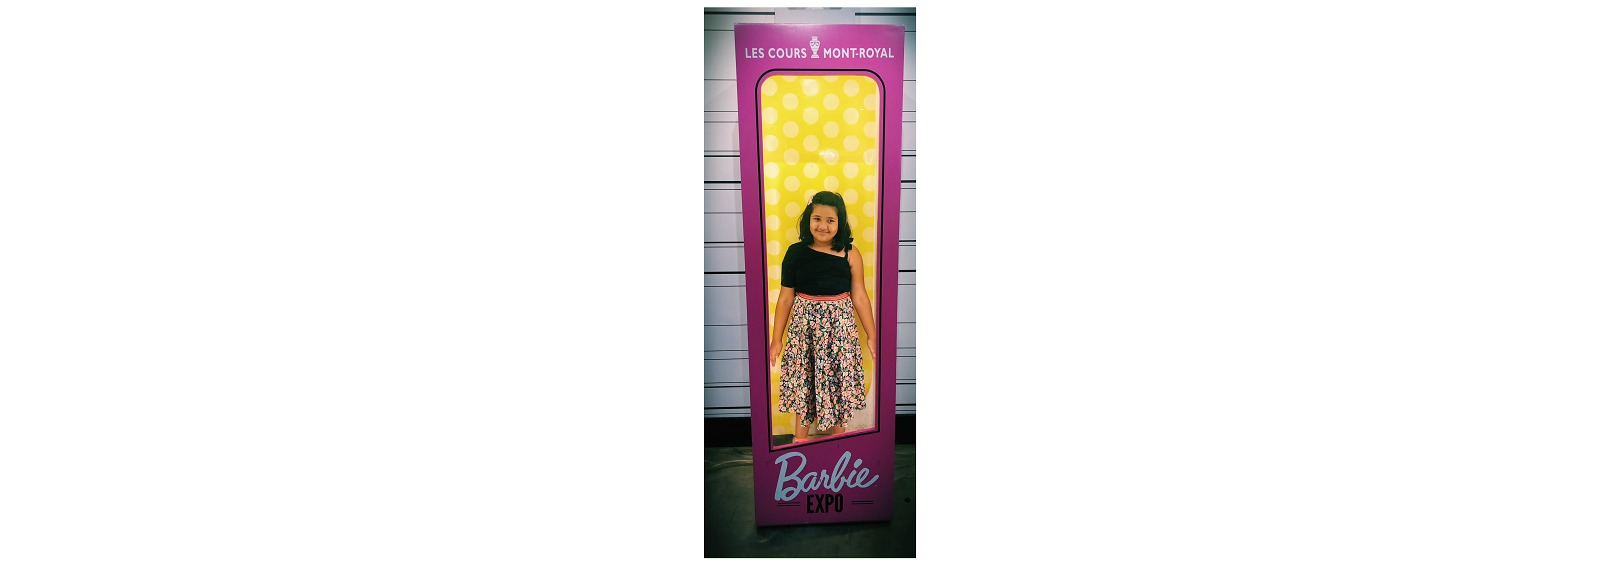 Student IG standing in a barbie box at barbie expo